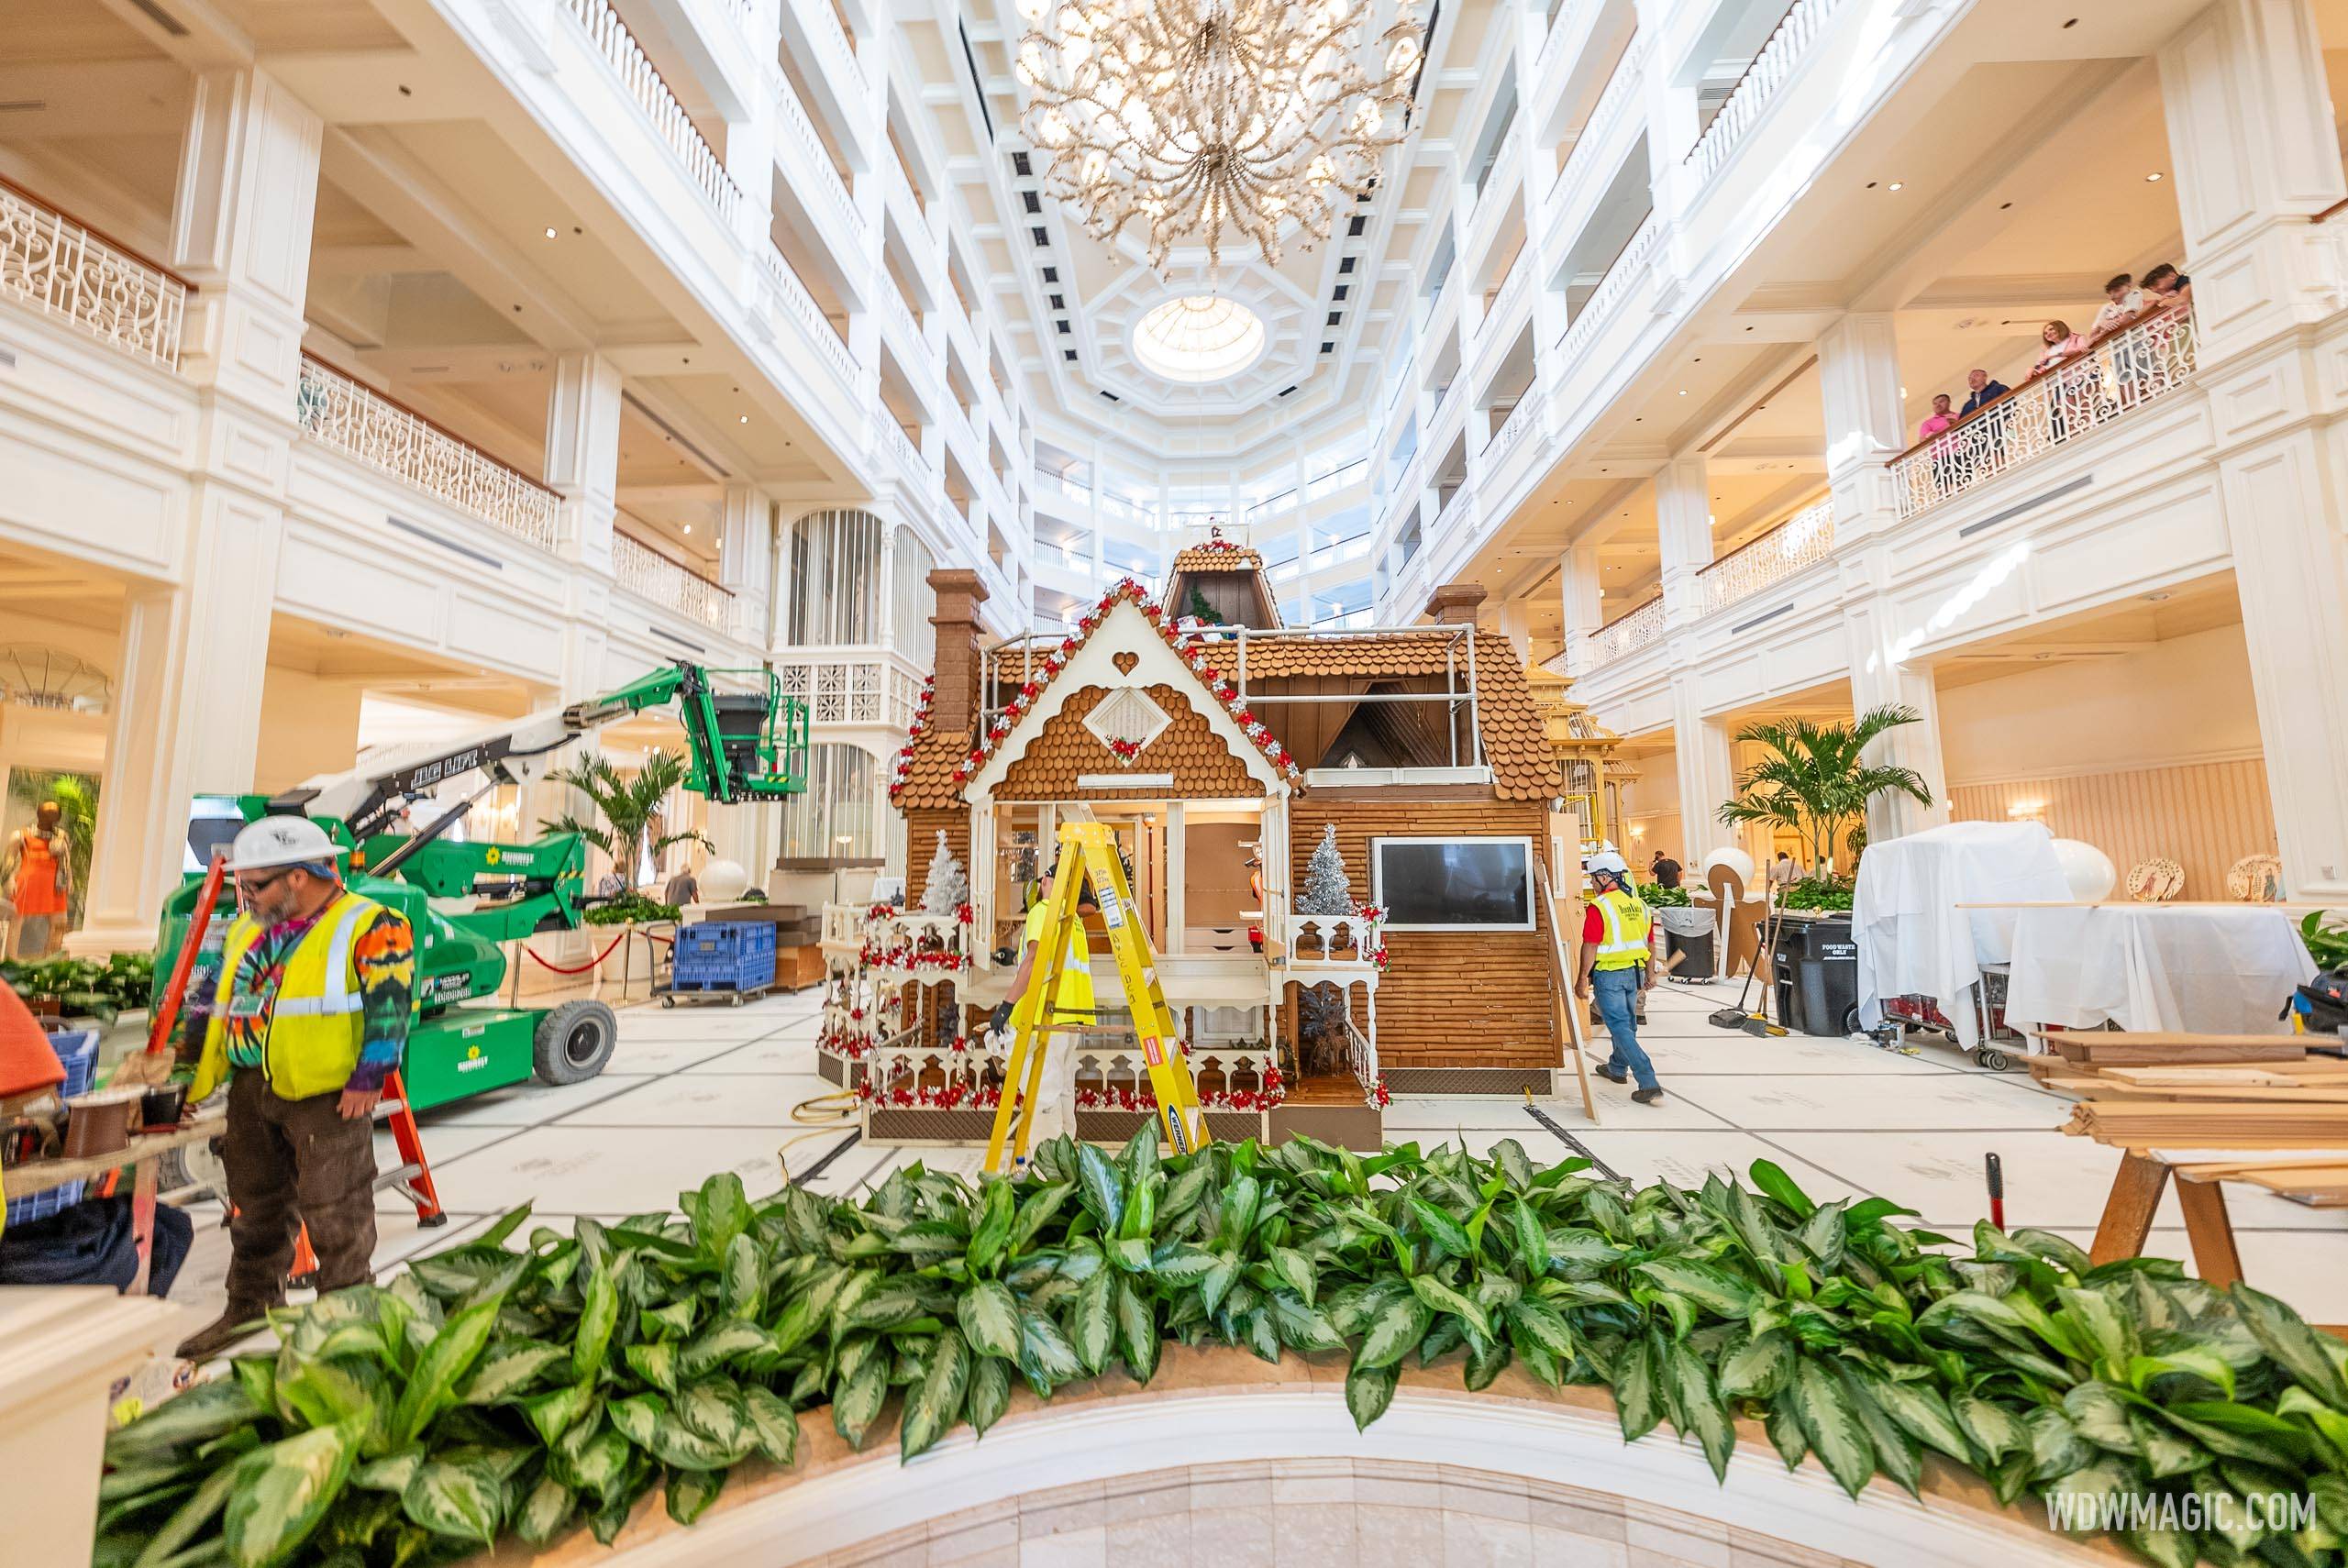 2023 Gingerbread House construction at Disney's Grand Floridian Resort